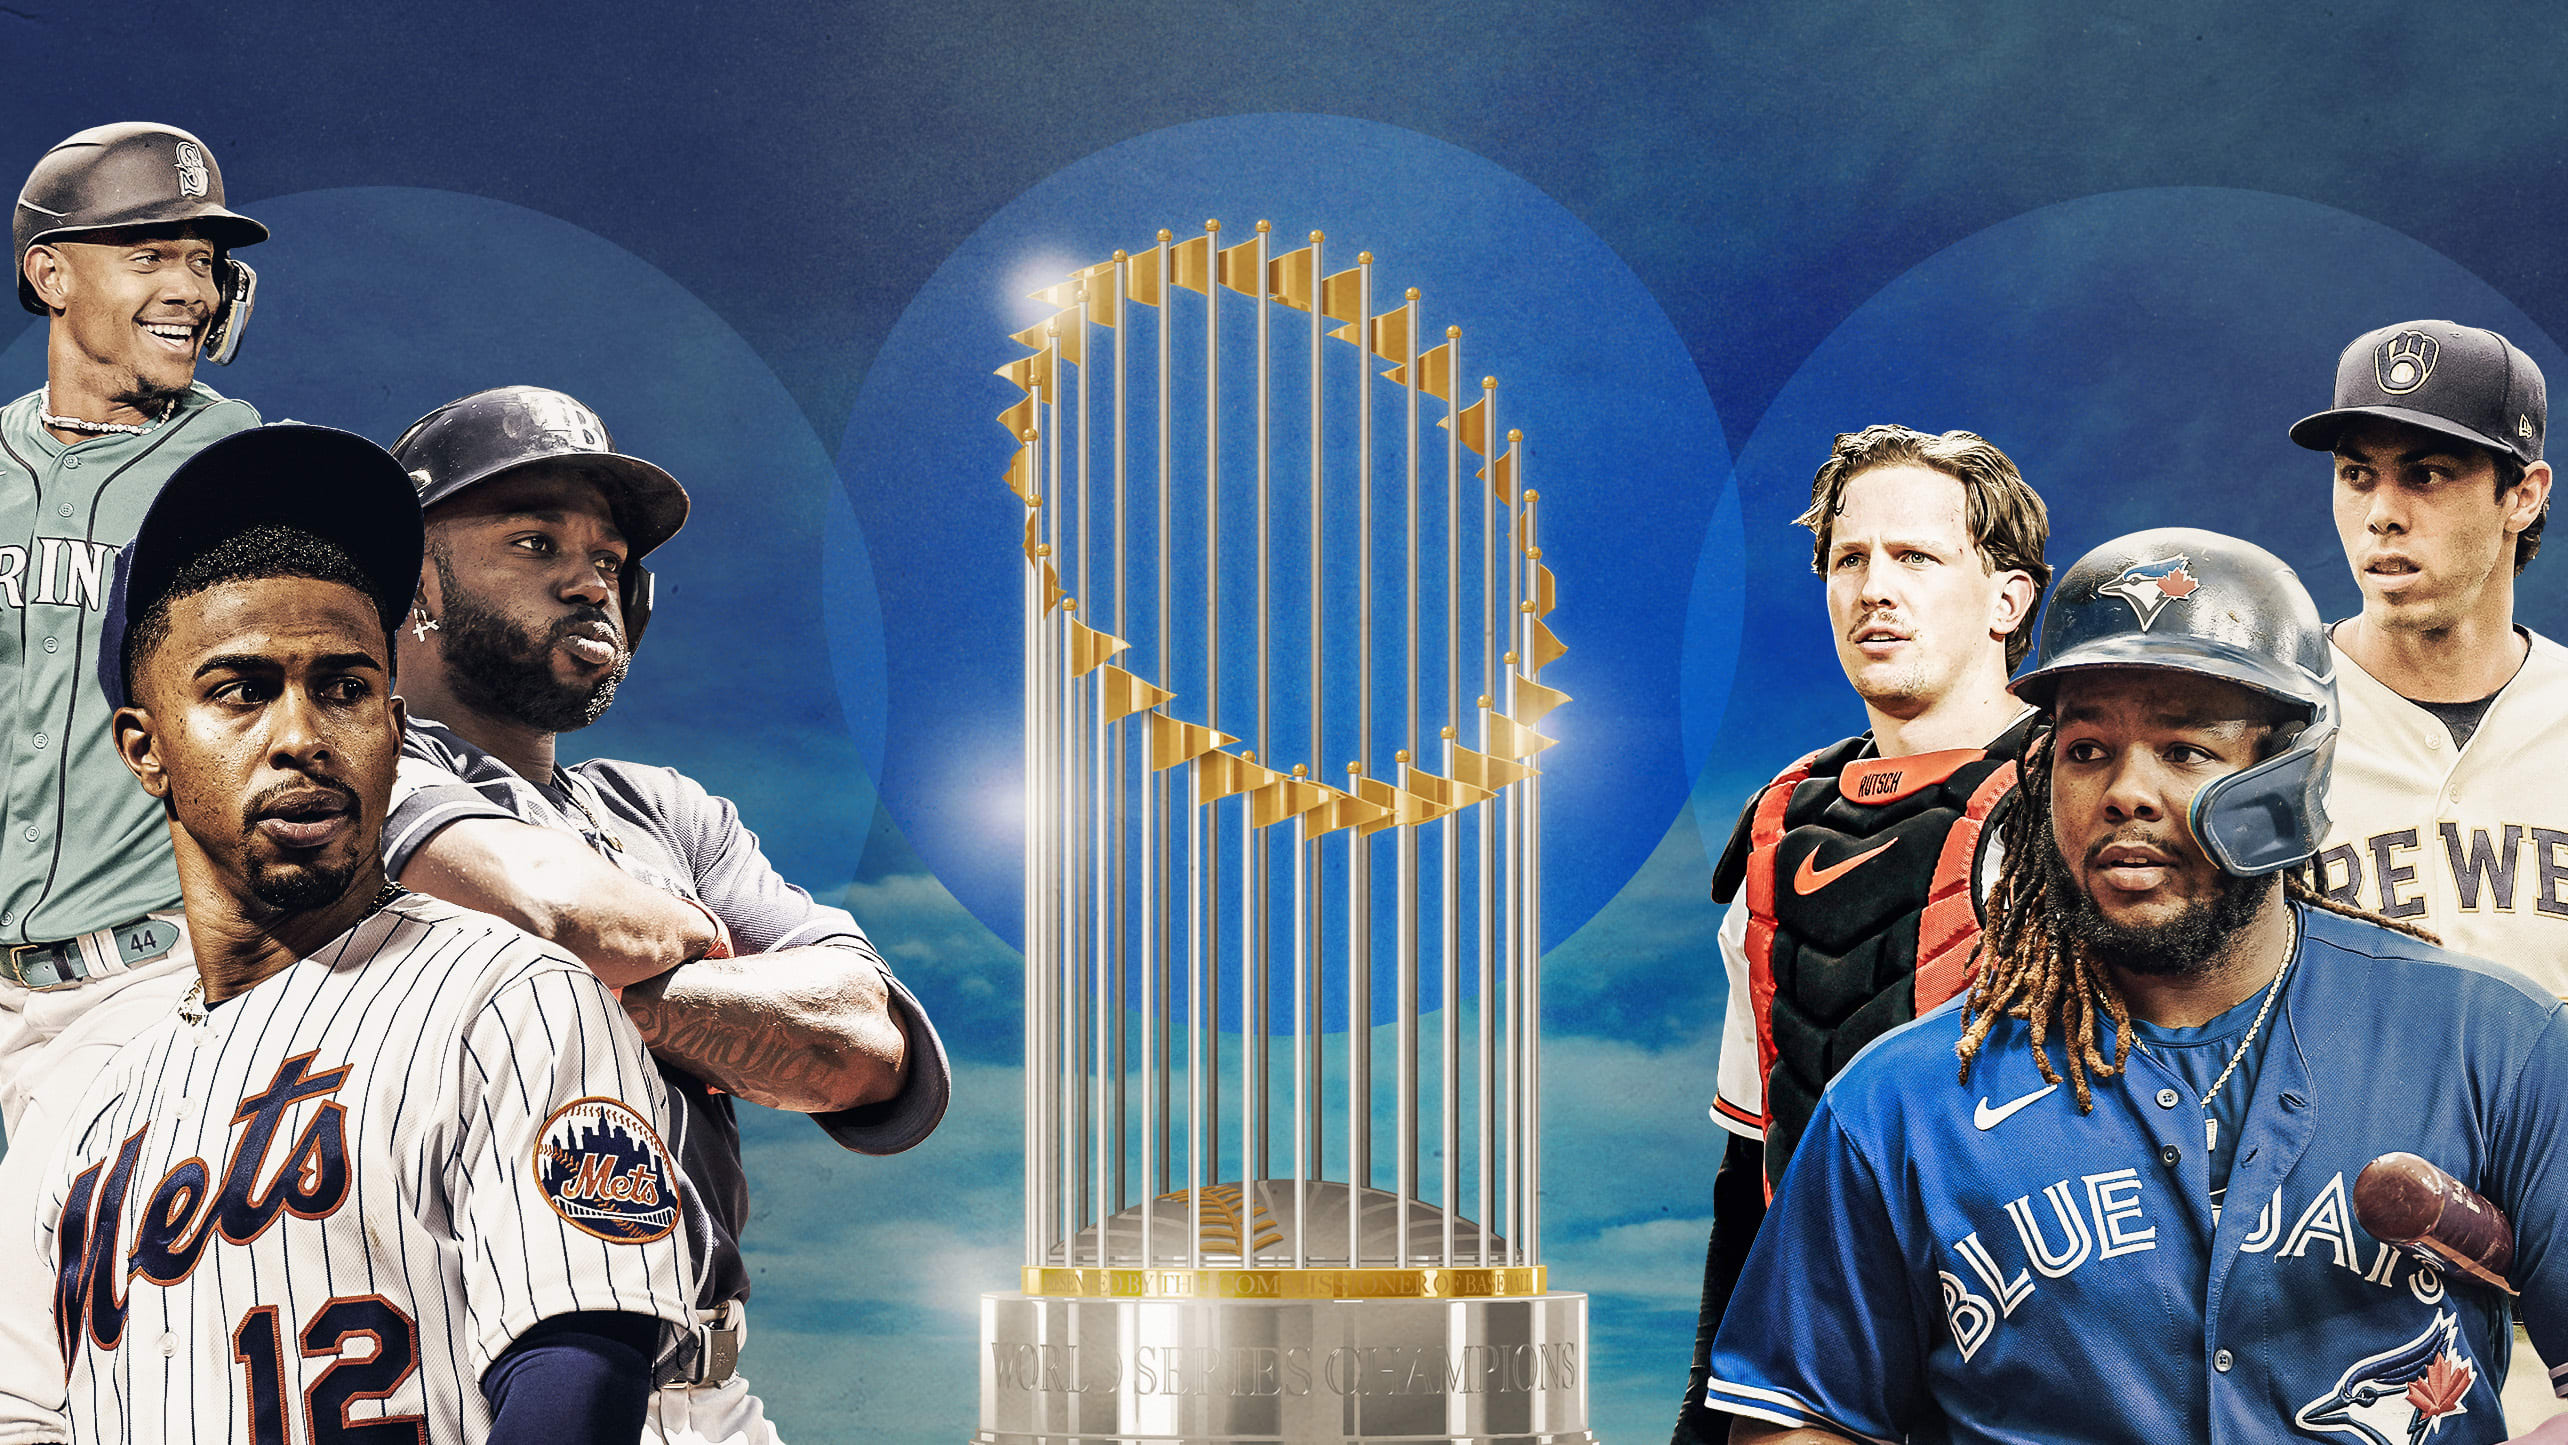 MLB players look longingly at the World Series trophy